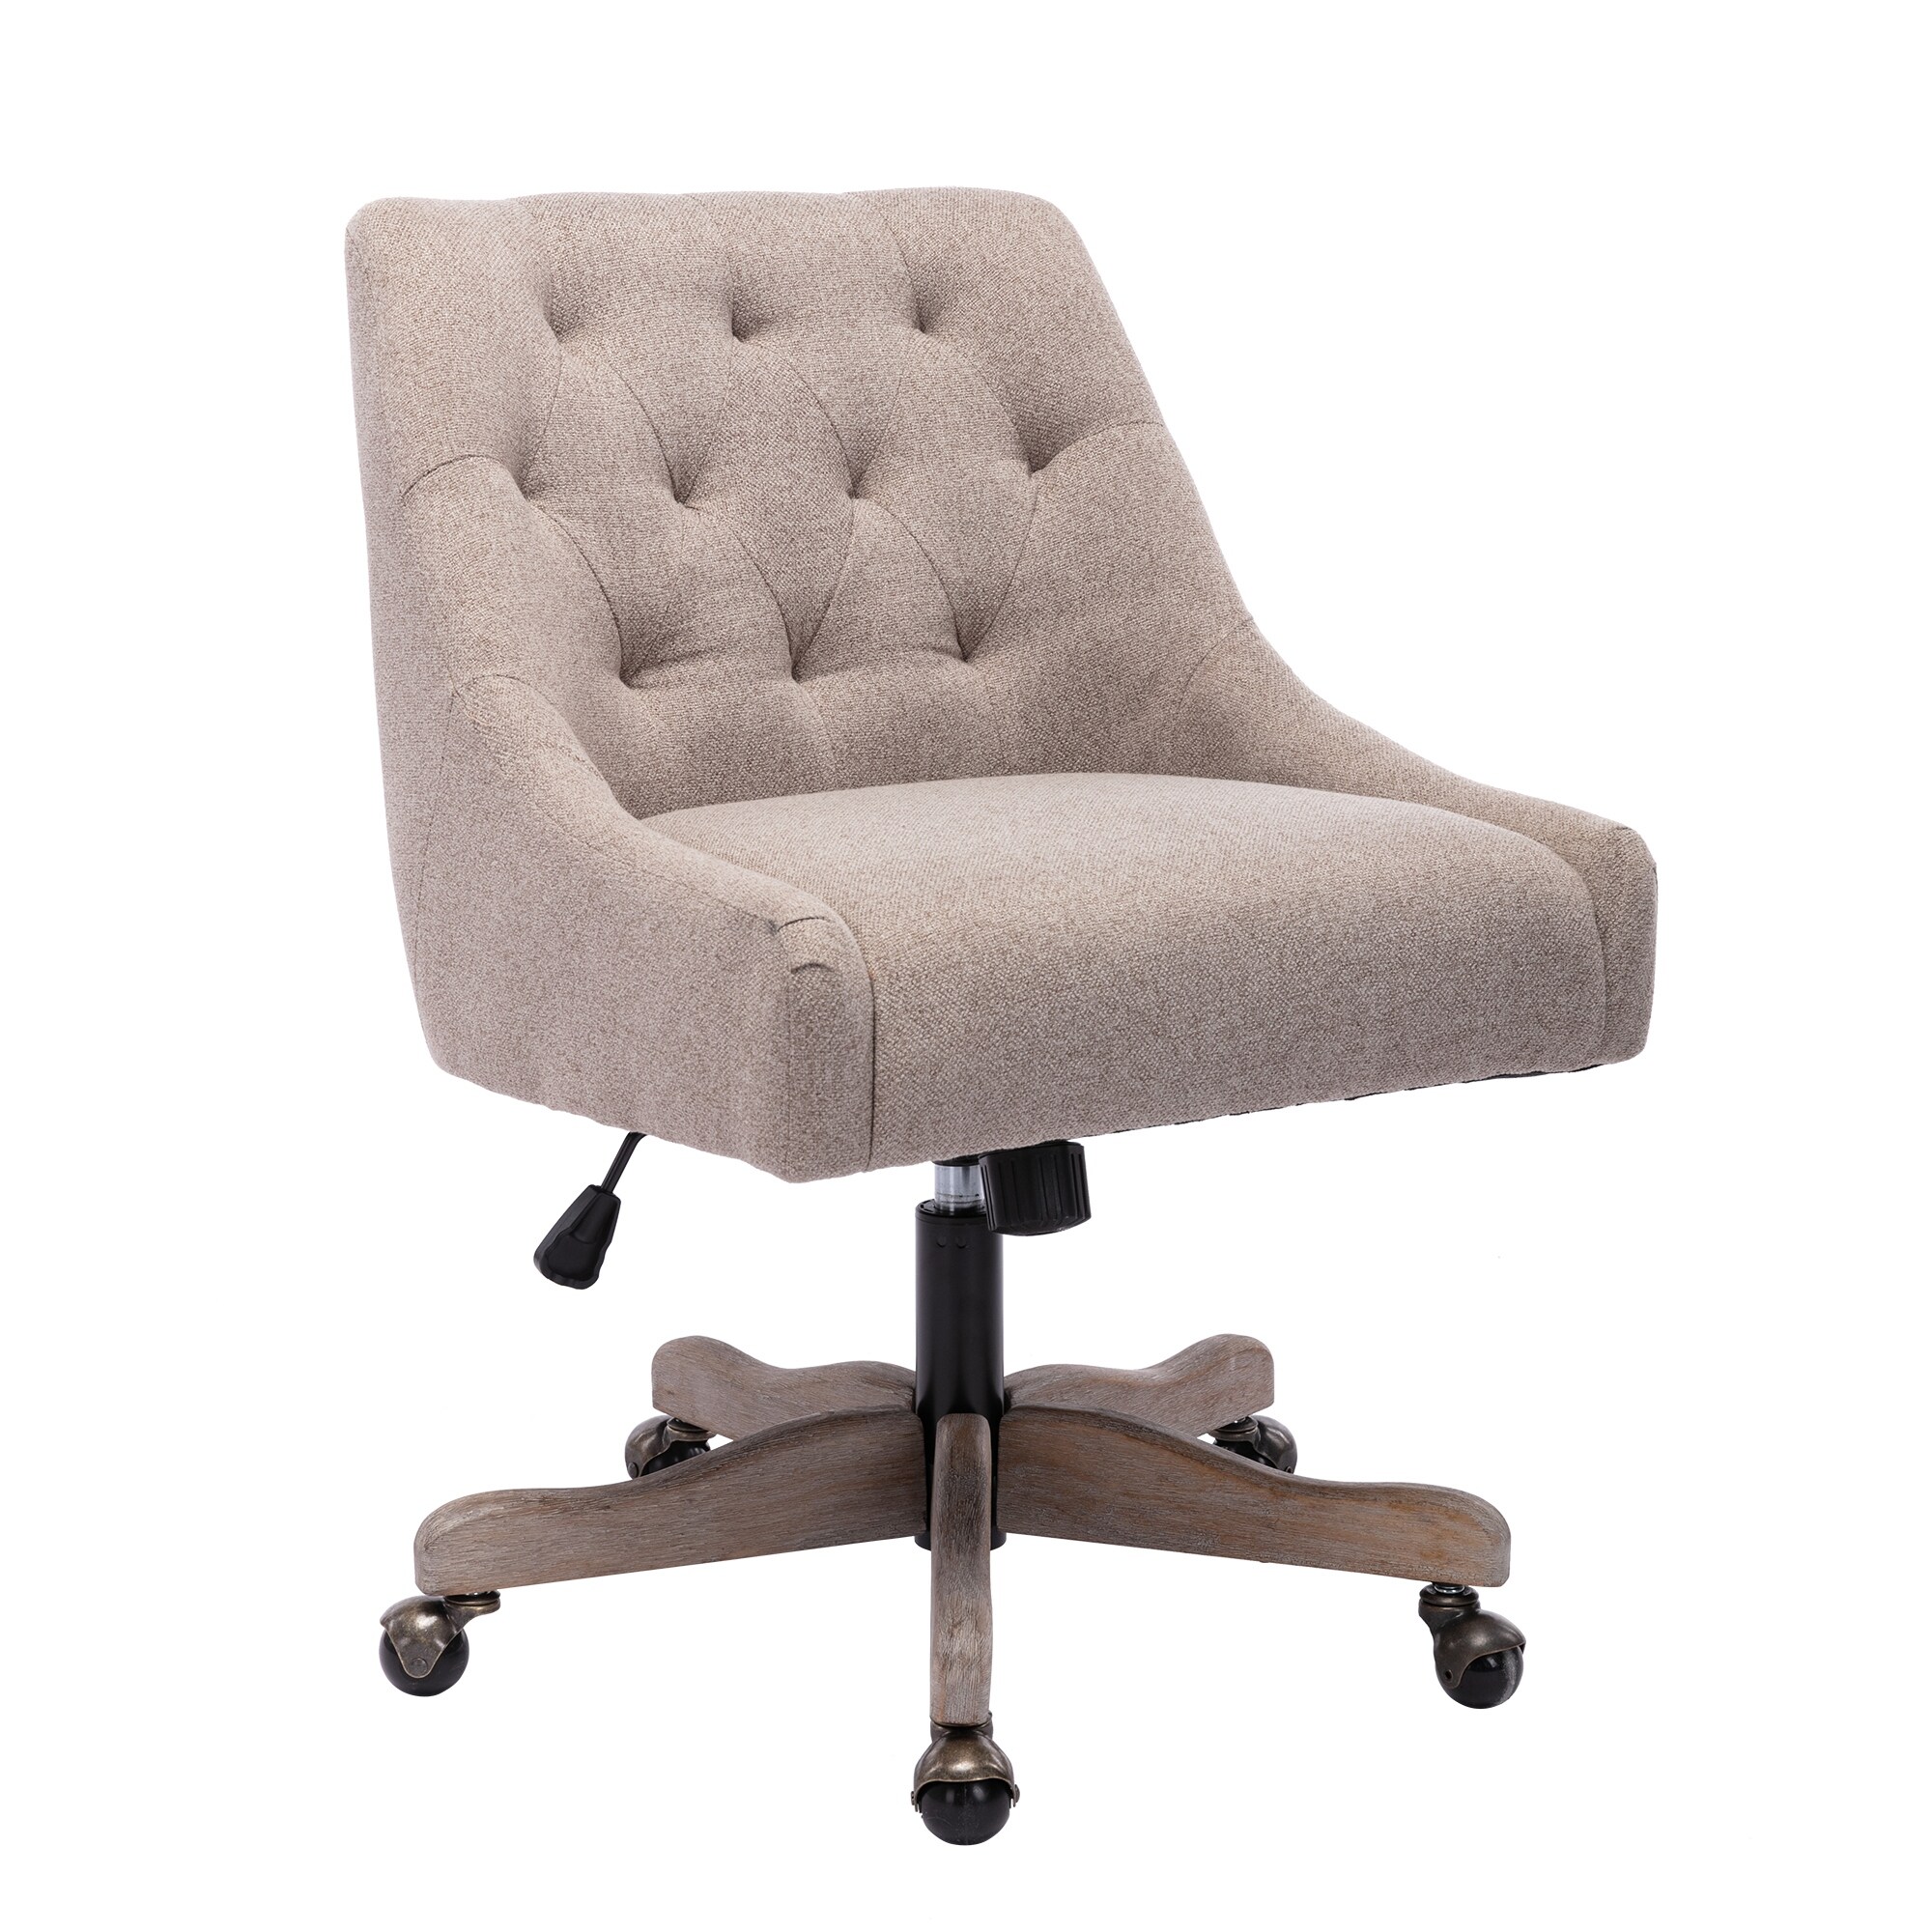 Swivel?Shell?Chair?Modern?Leisure Home office?Chair with Adjustable Height - Charcoal grey